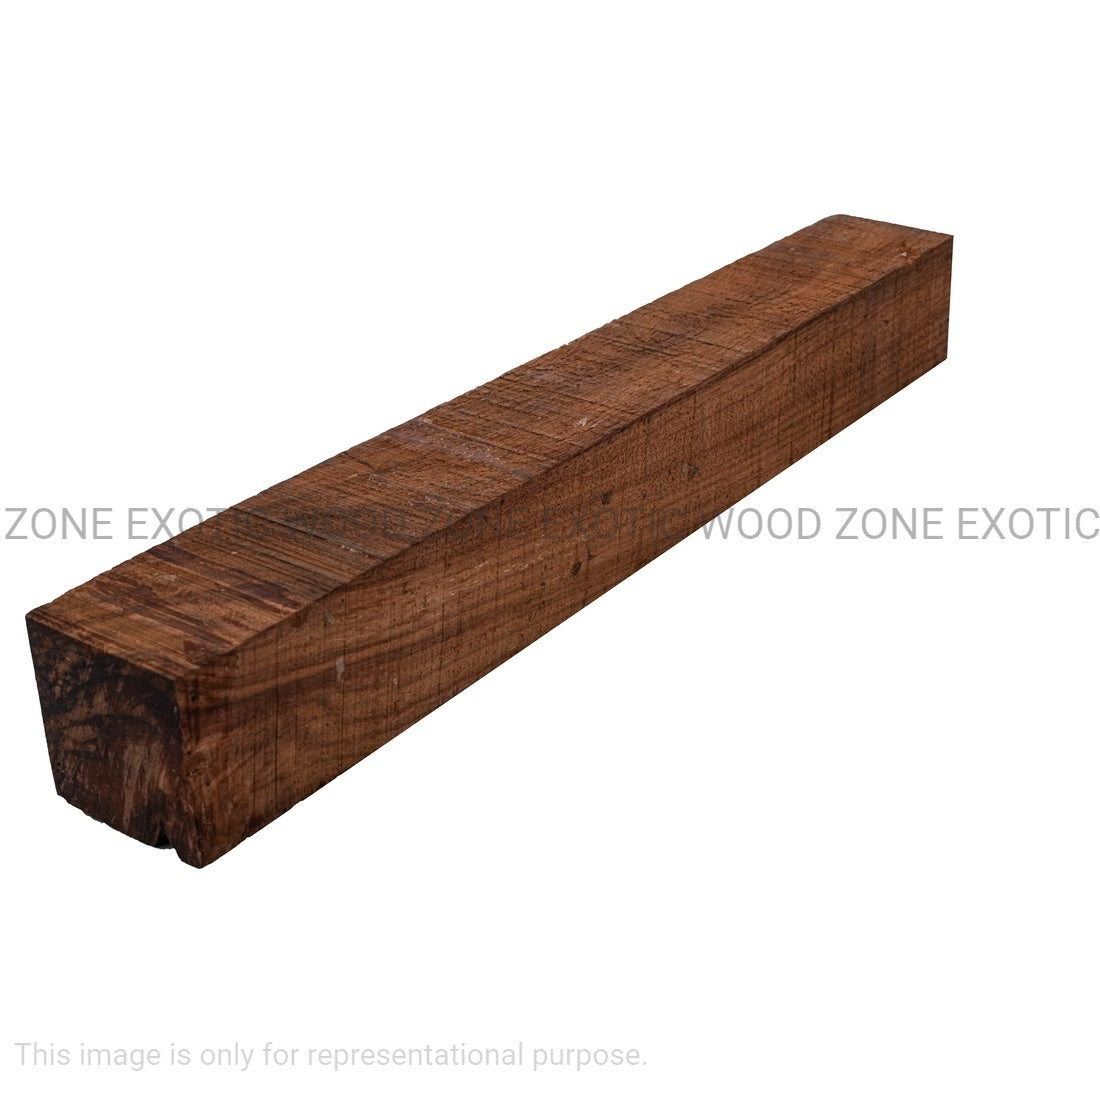 Canarywood Exotic Wood Pool Cue Blanks 1-1/2&quot;x 1-1/2&quot;x 18&quot; - Exotic Wood Zone - Buy online Across USA 